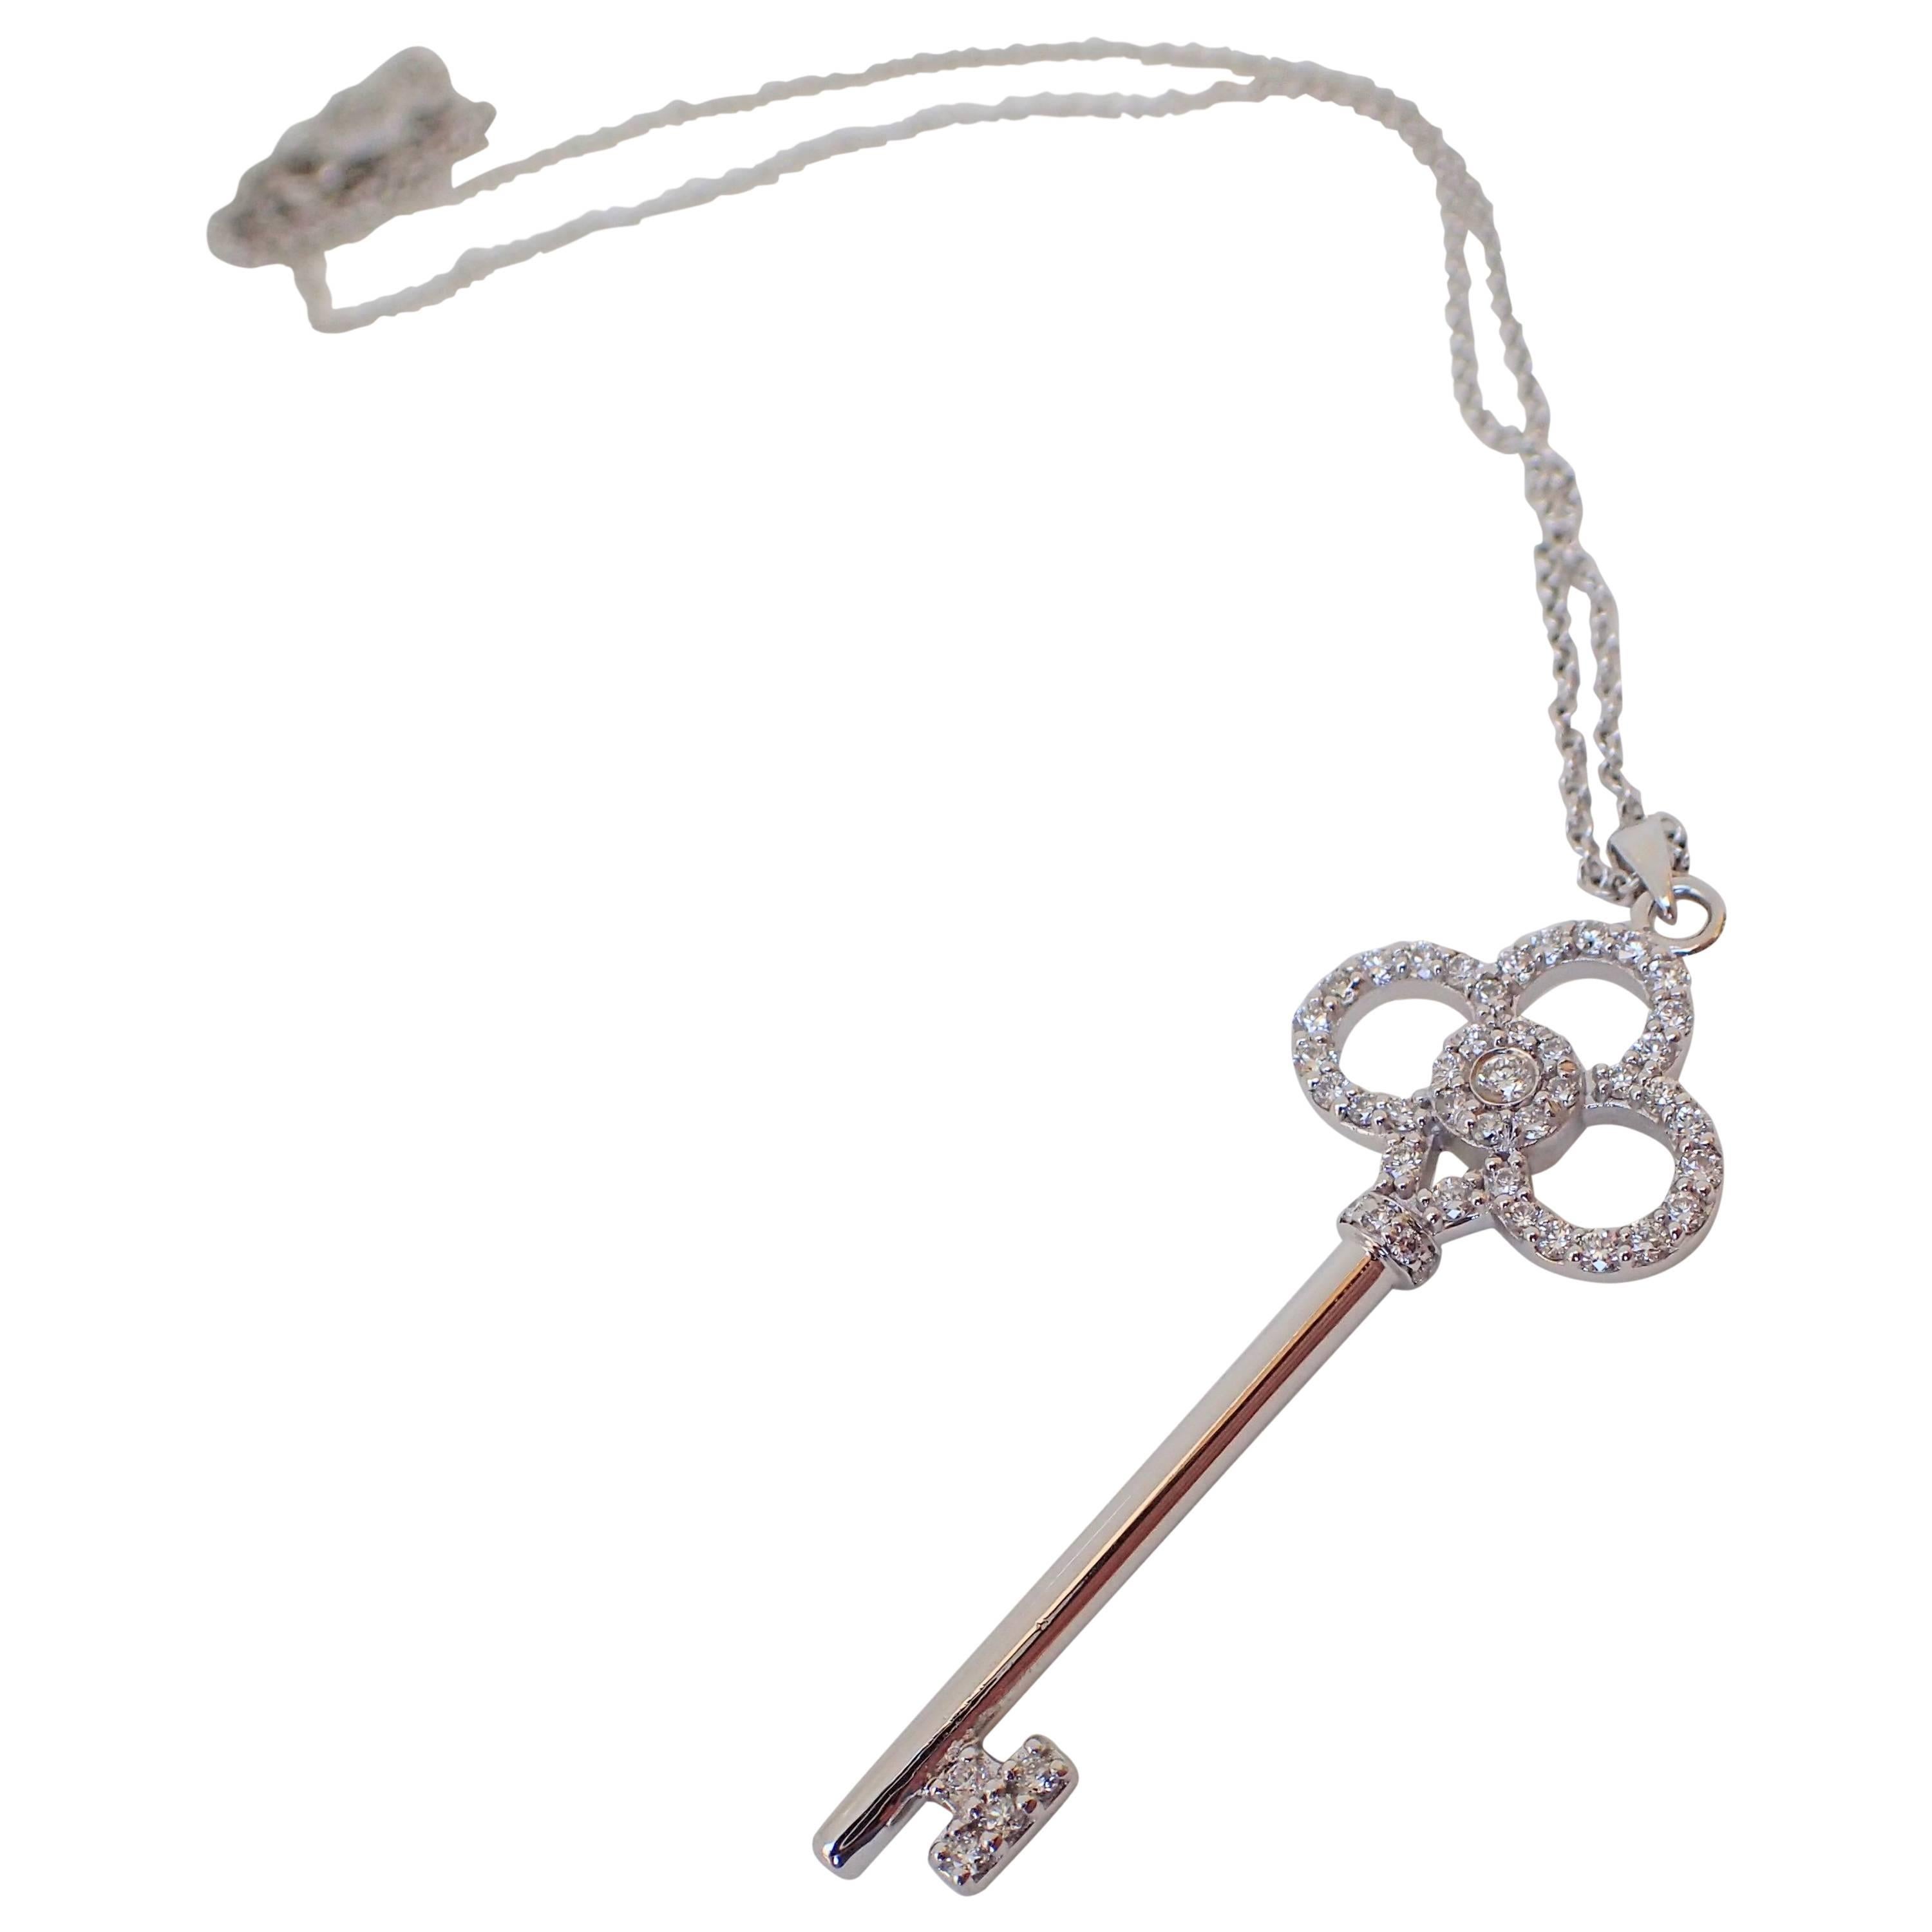 Contemporary 18 Karat White Gold Key Pendant with 0.43 Carat of Diamond on Cable Chain For Sale